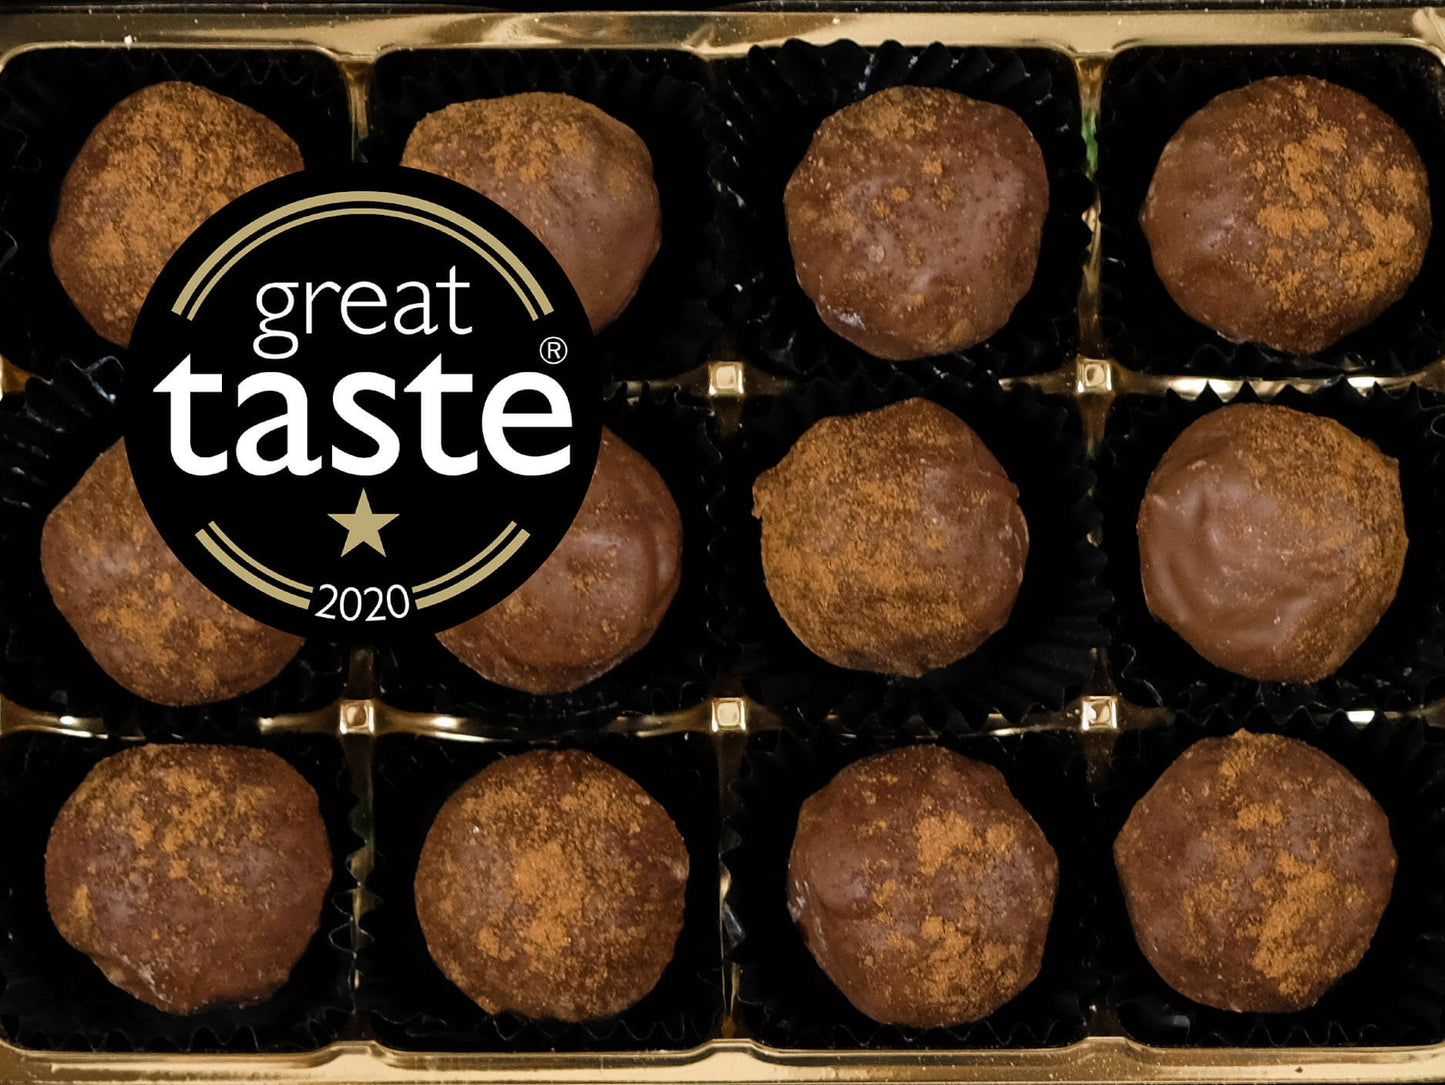 Image shows a box of 12 hand made Norfolk Apple dairy cream truffles with the Great Taste logo